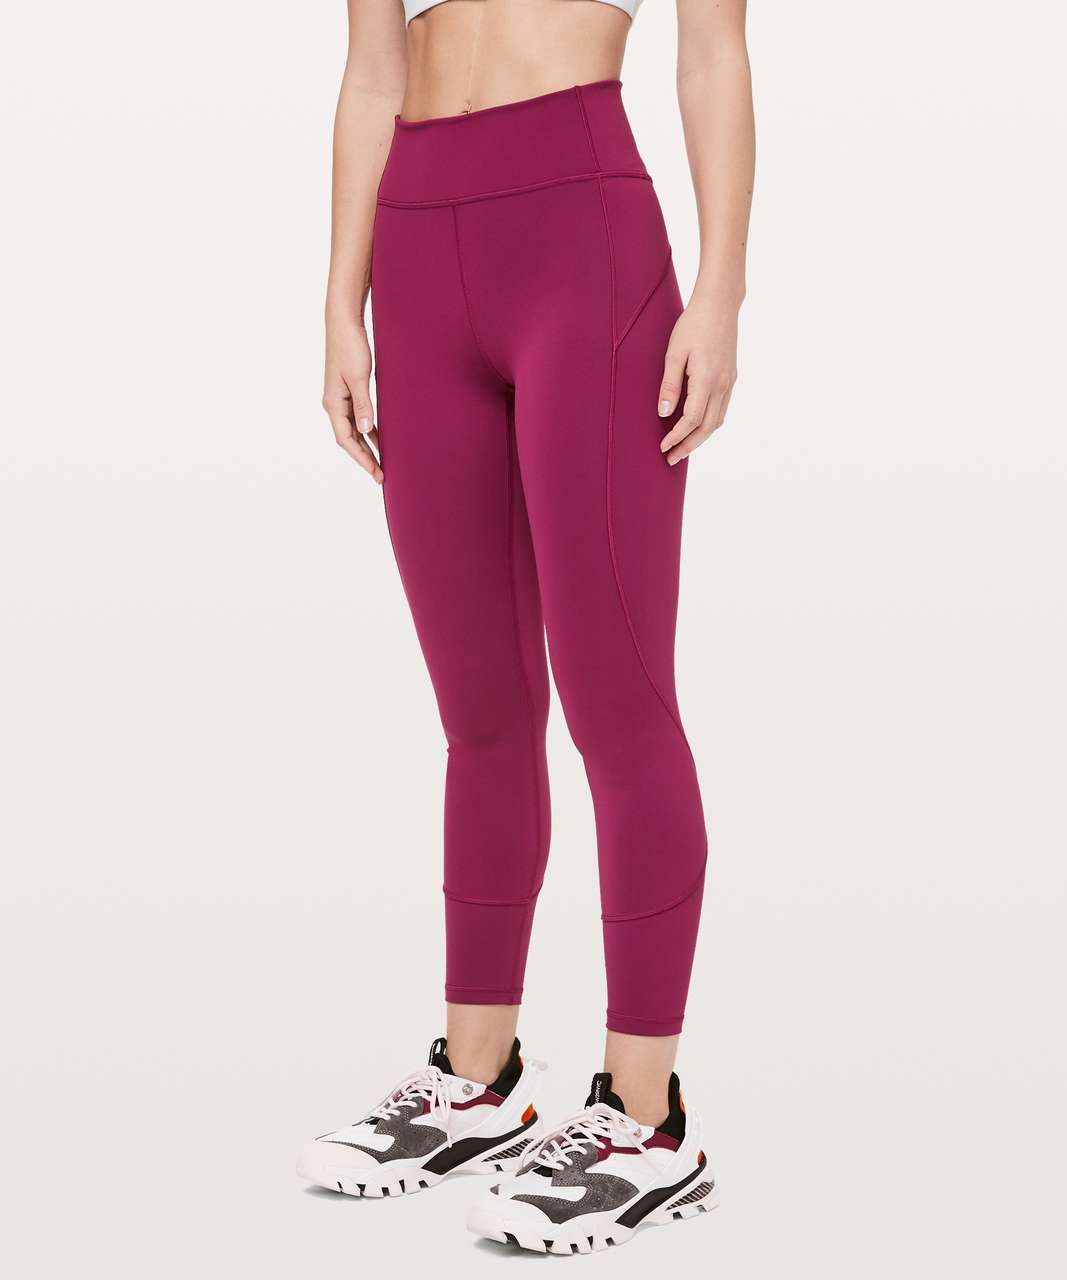 Lululemon In Movement 7/8 Tight *Everlux 25" - Star Ruby